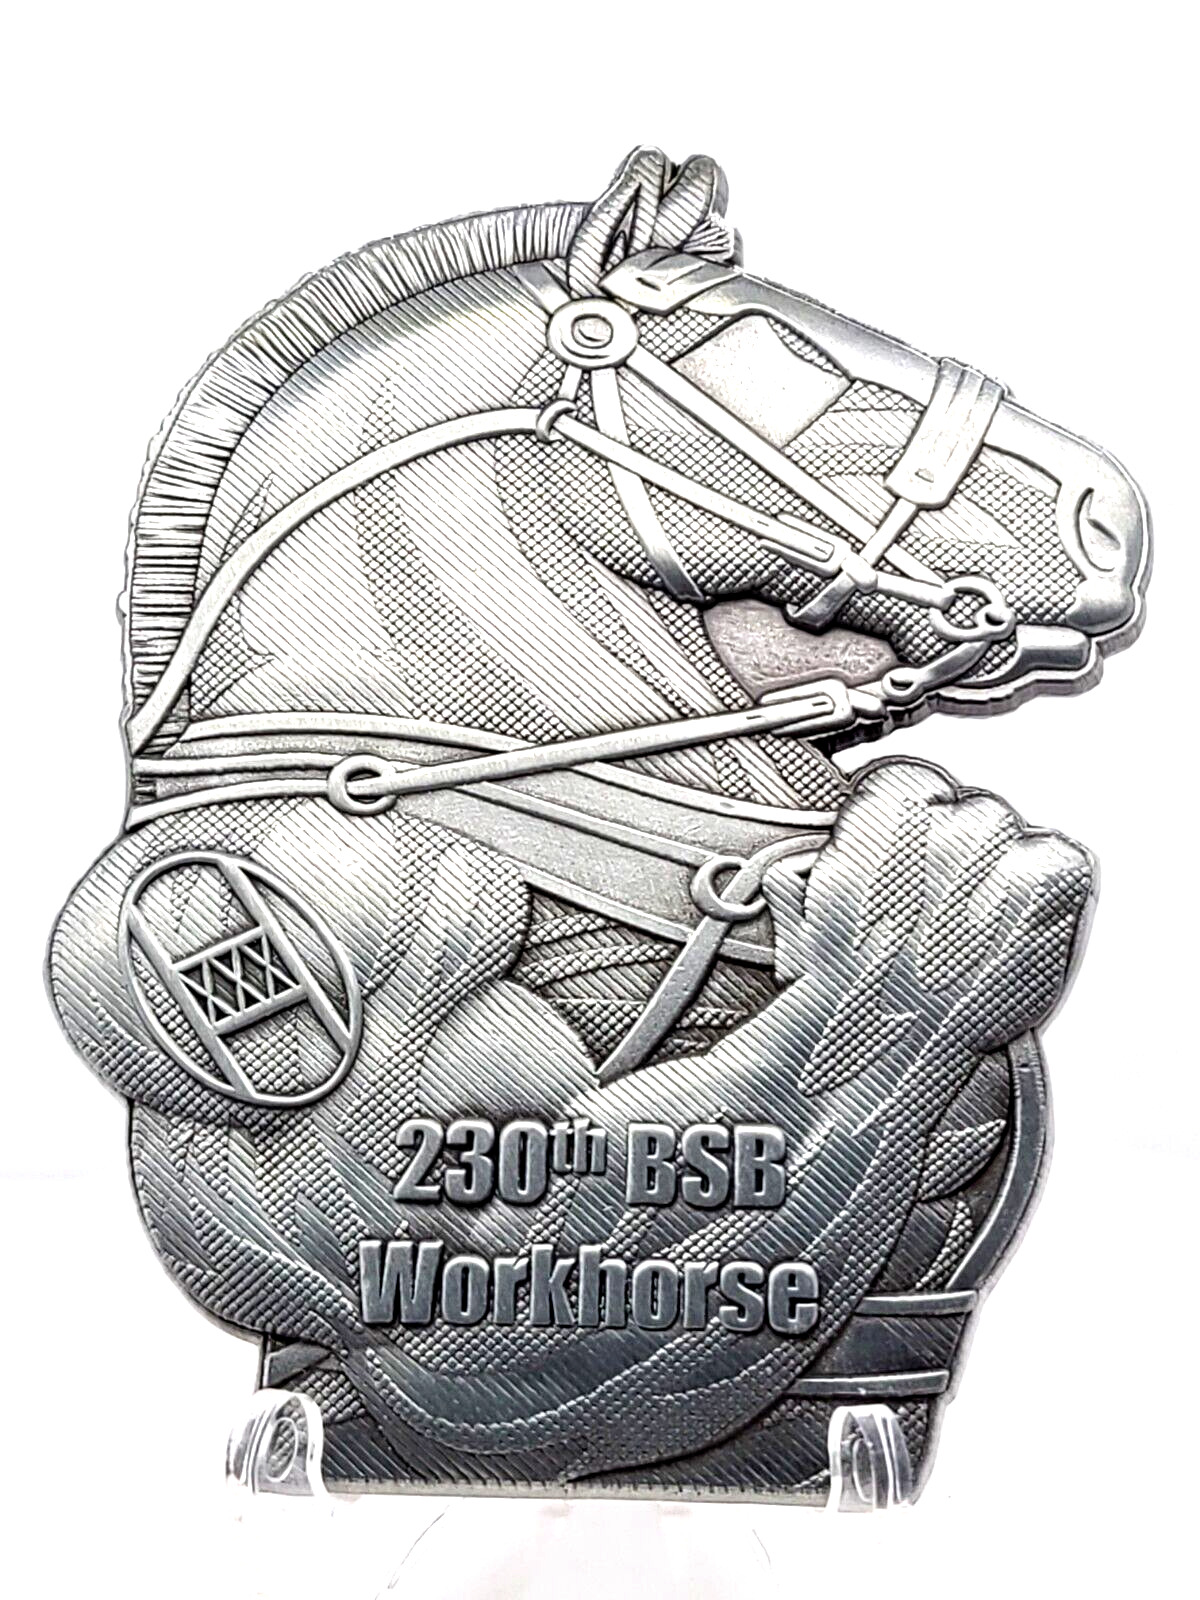 Operation Spartan Shield 230th Horse Power of the Brigade 2019-2020 Coin